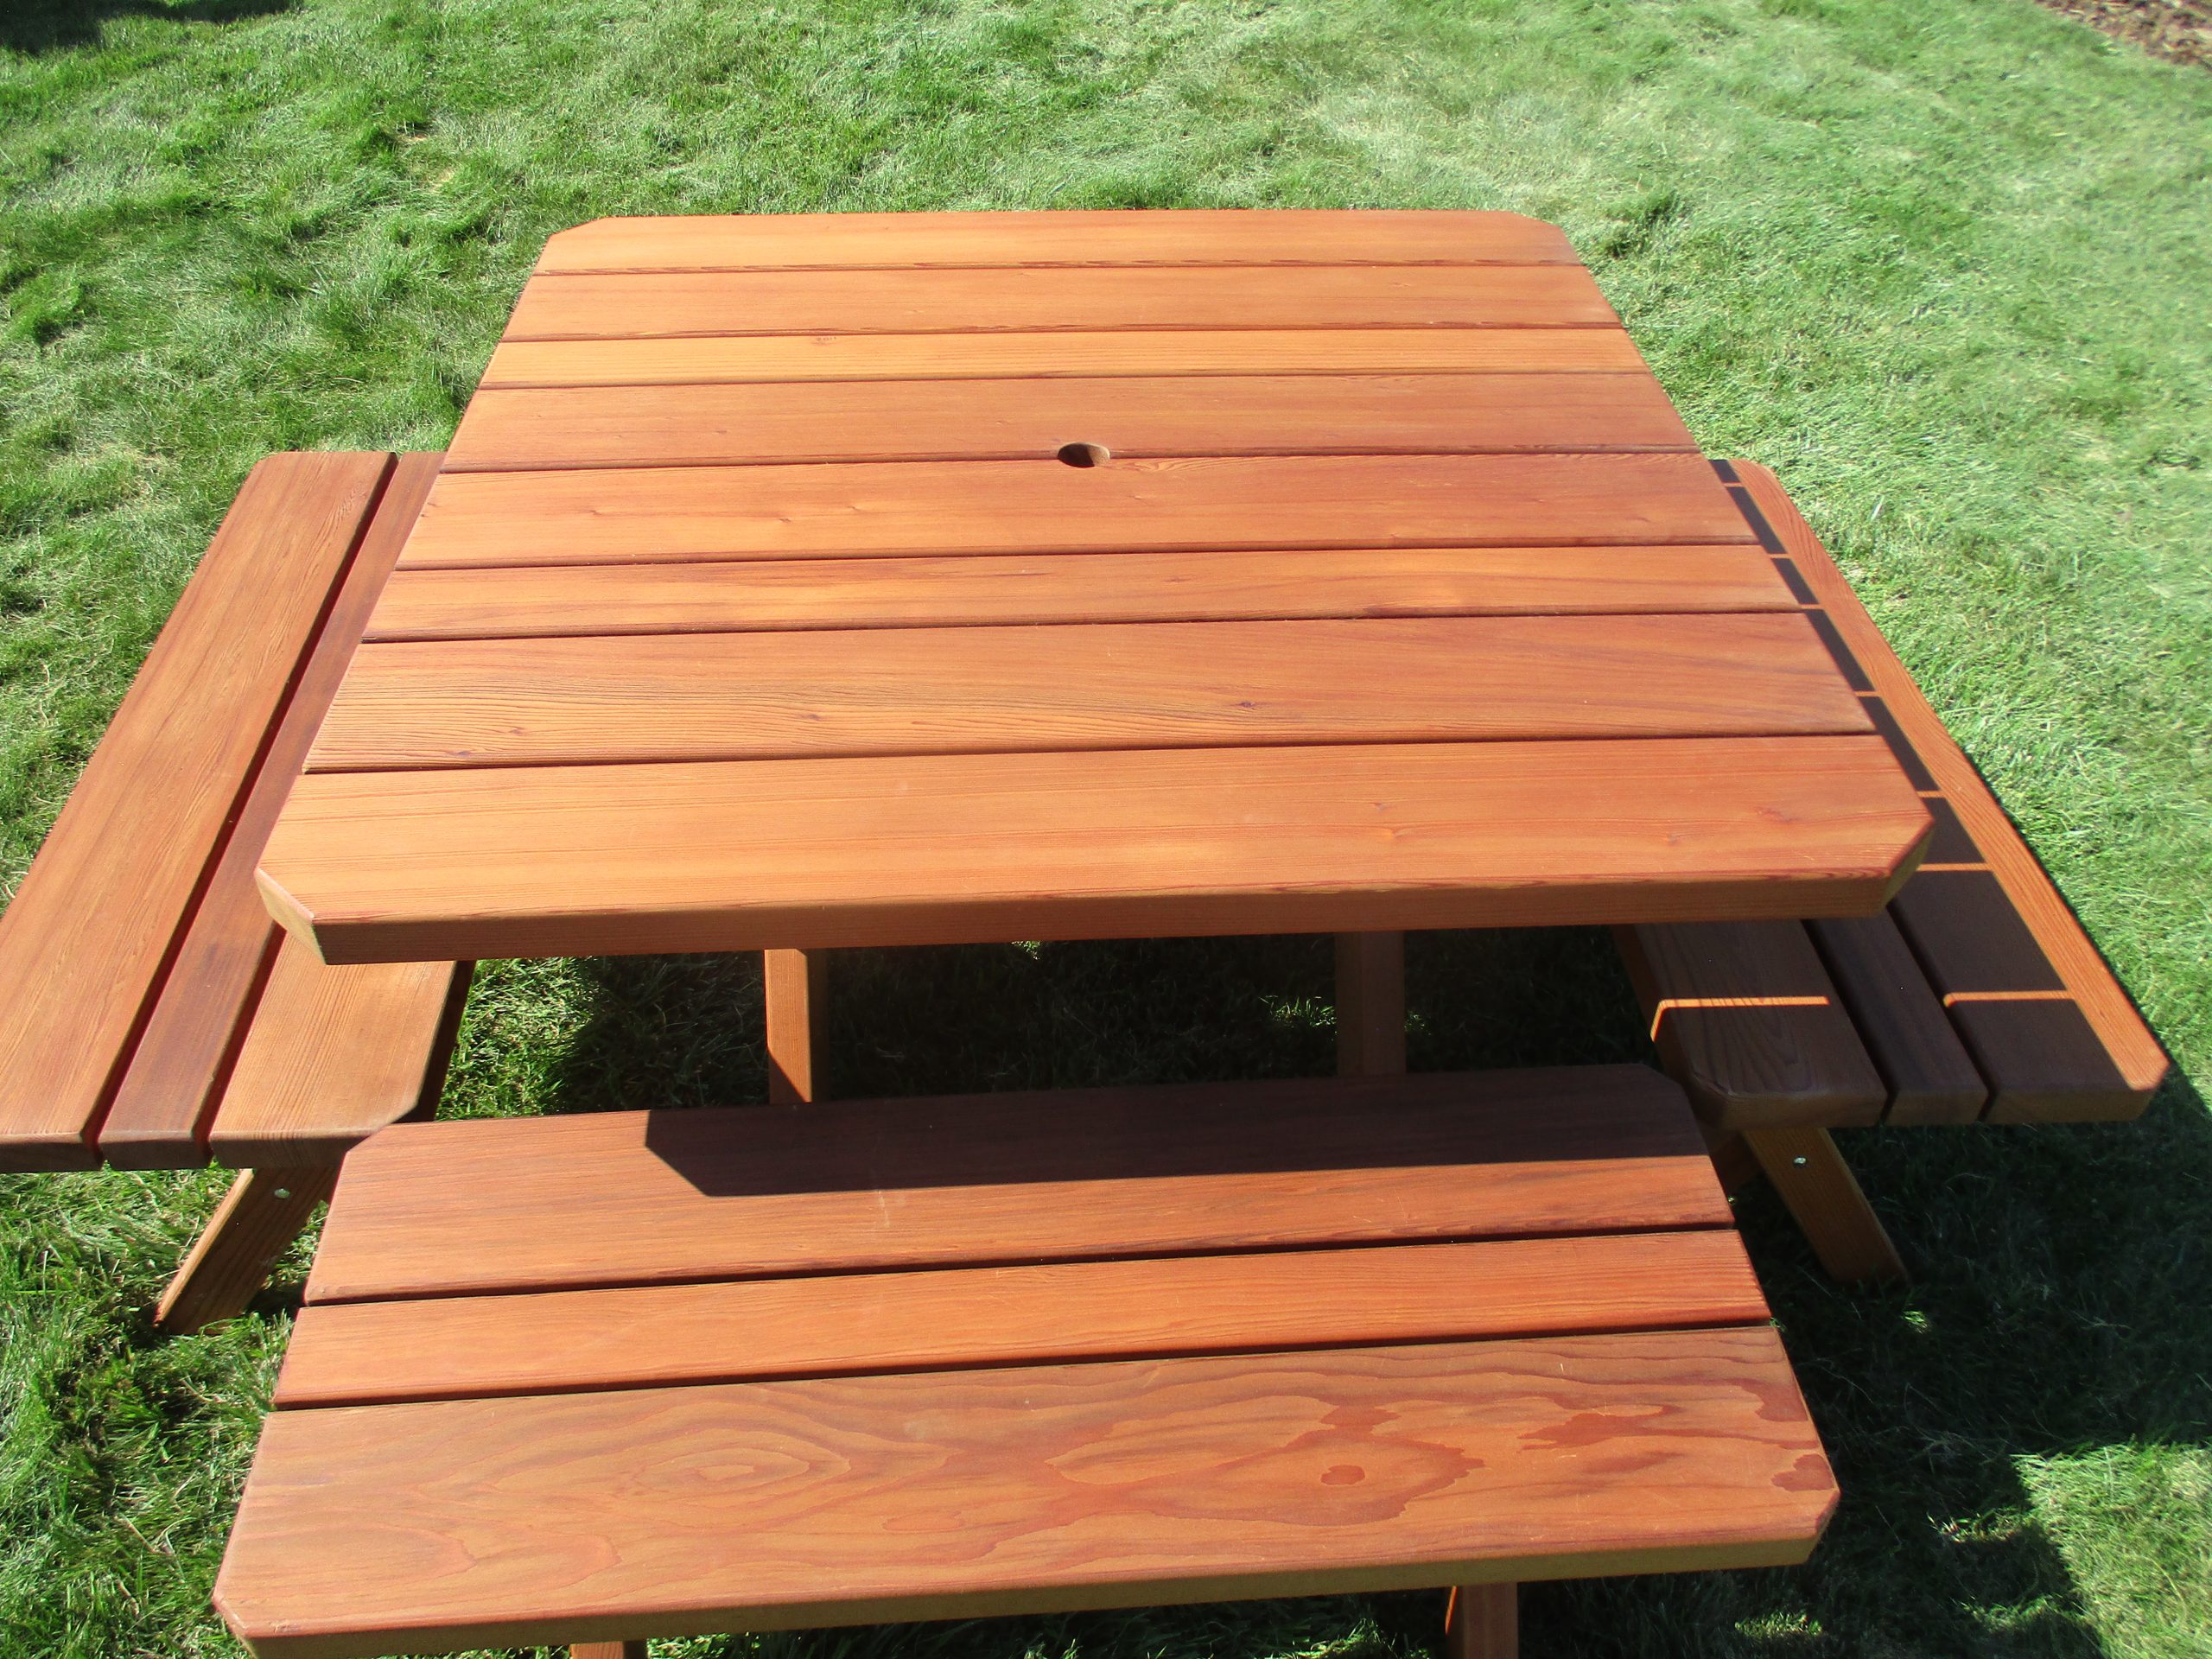 Outdoor Redwood Picnic Tables - from Best Redwood - Home Delivery 